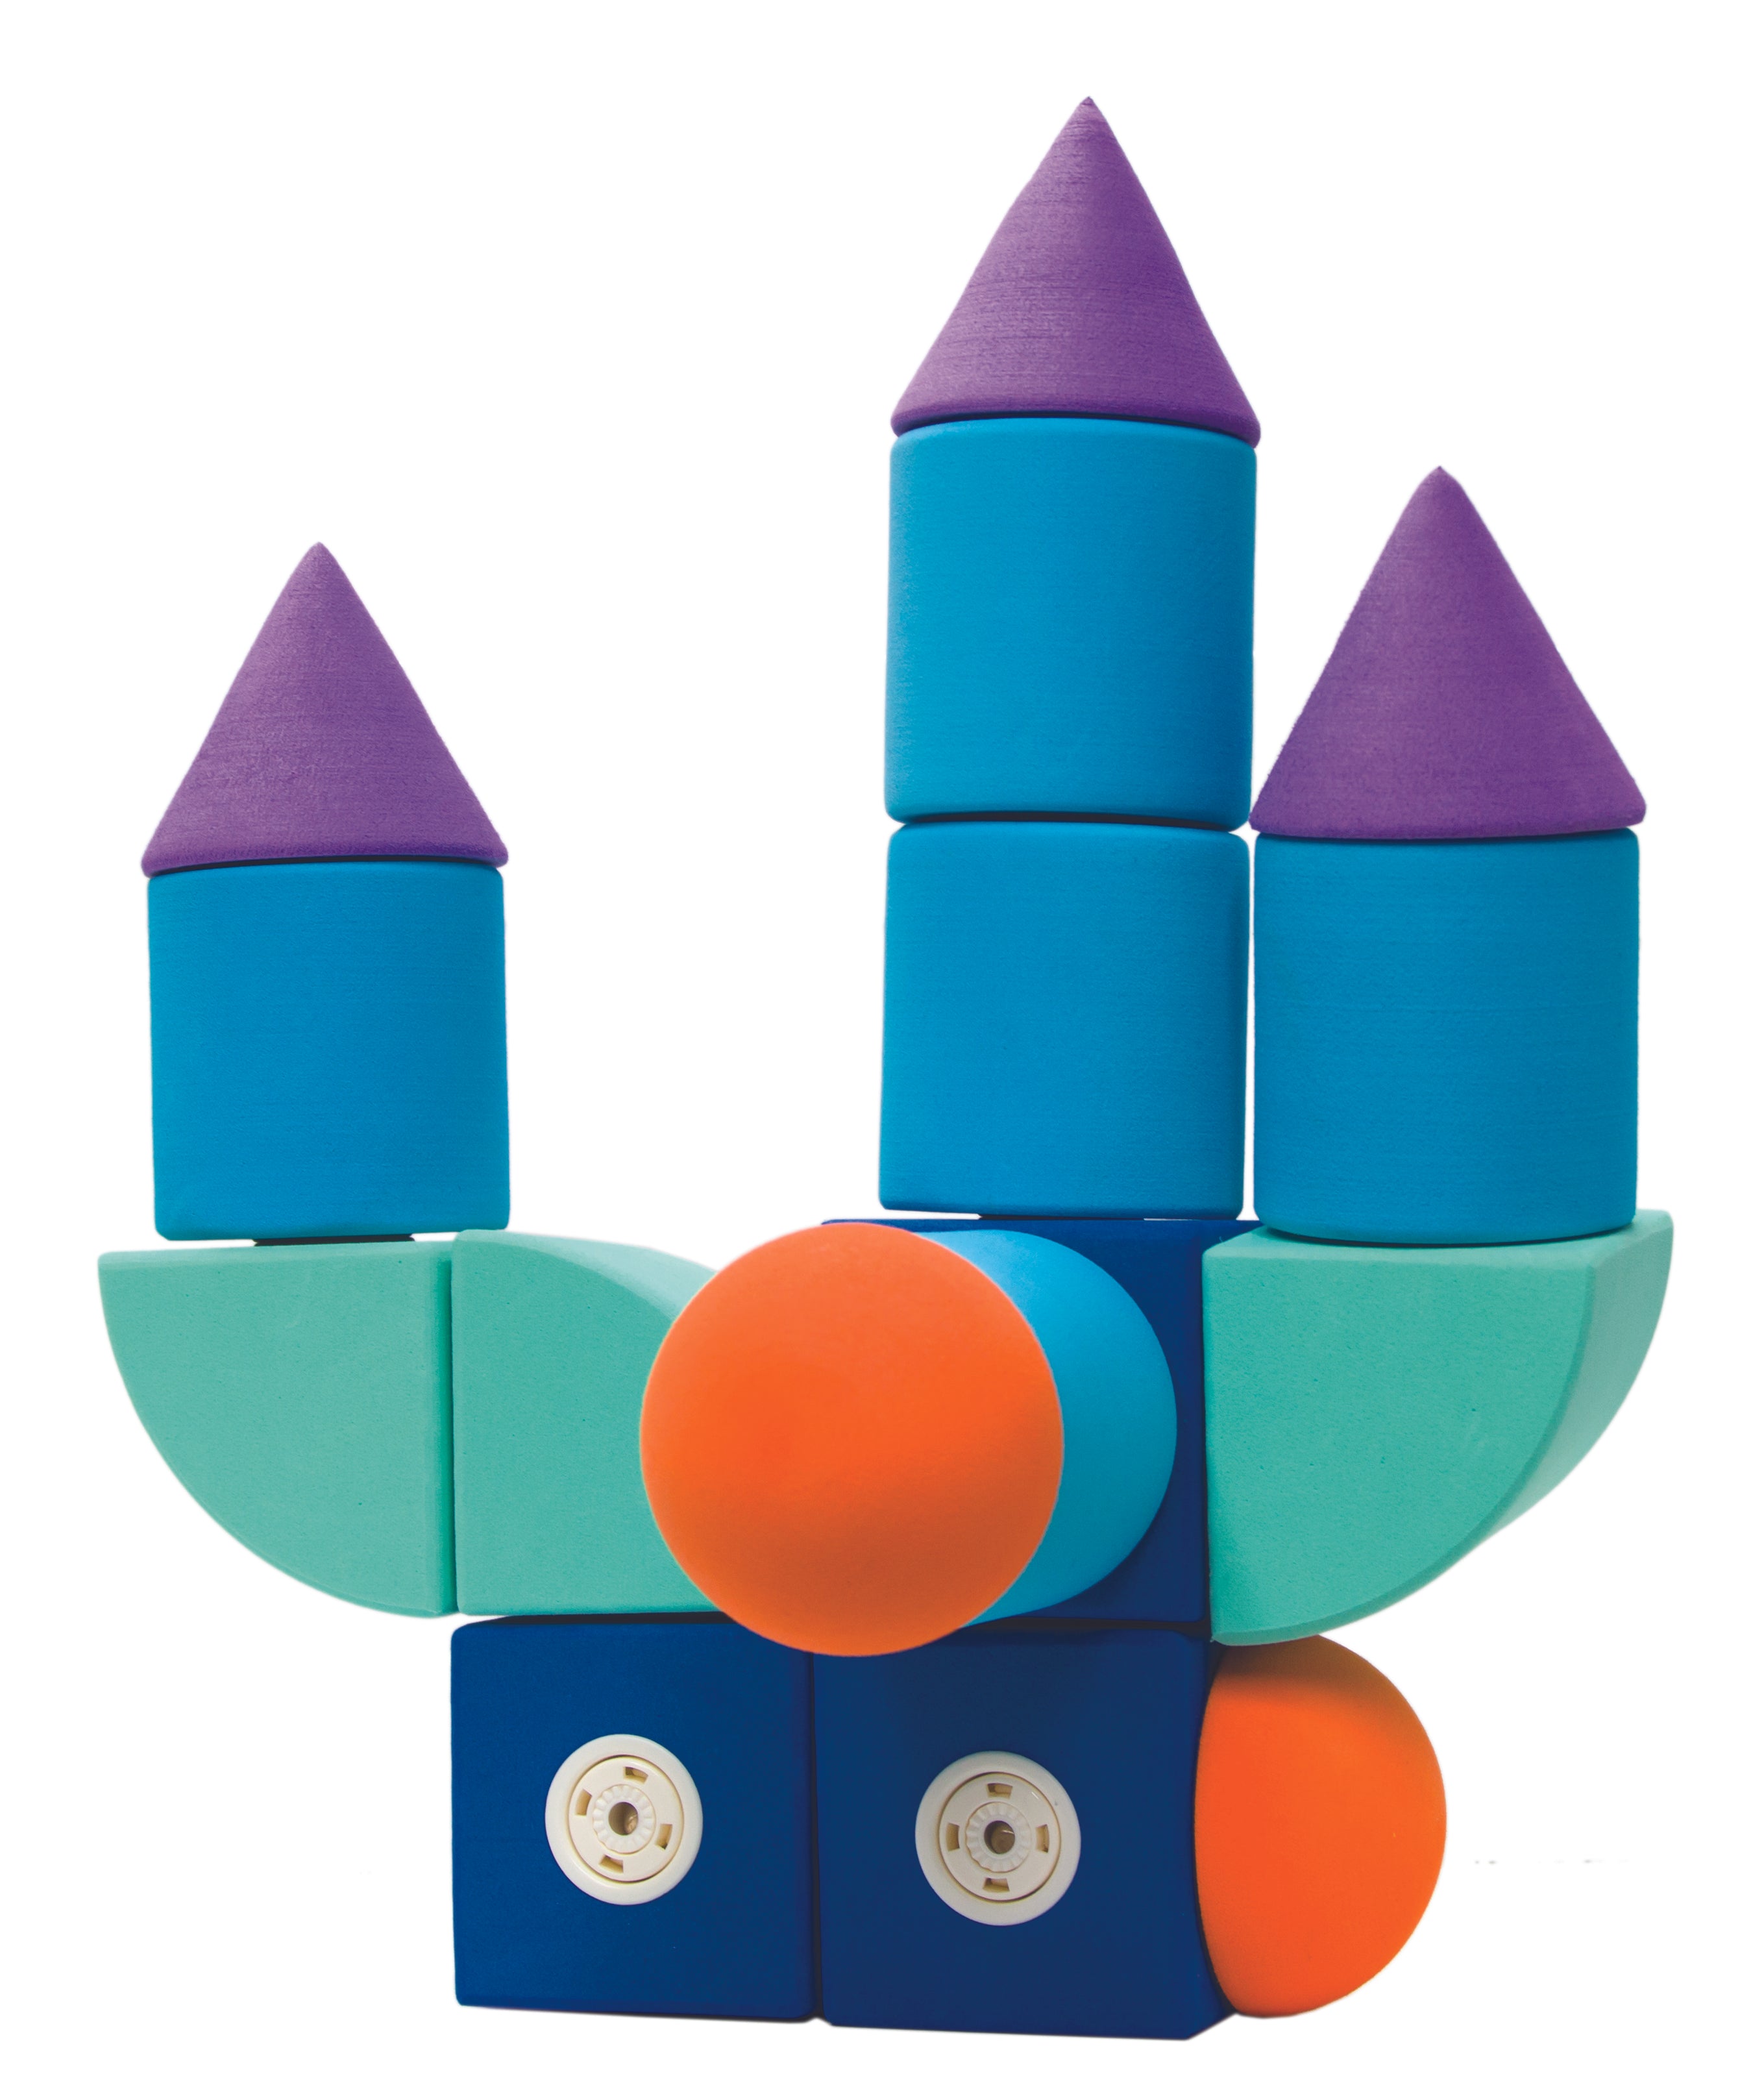 Block-a-Roo Once Upon a Stem blocks setup into 3 towers. The tower tops are purple cone shapes.  The cylindrical shaped blue pieces make up the tower portions. There are 3 dark blue square pieces, 3 turquoise rounded-triangle shapes, and 2 orange half circle pieces connected to the towers. They are stuck together by magnets inside each piece.